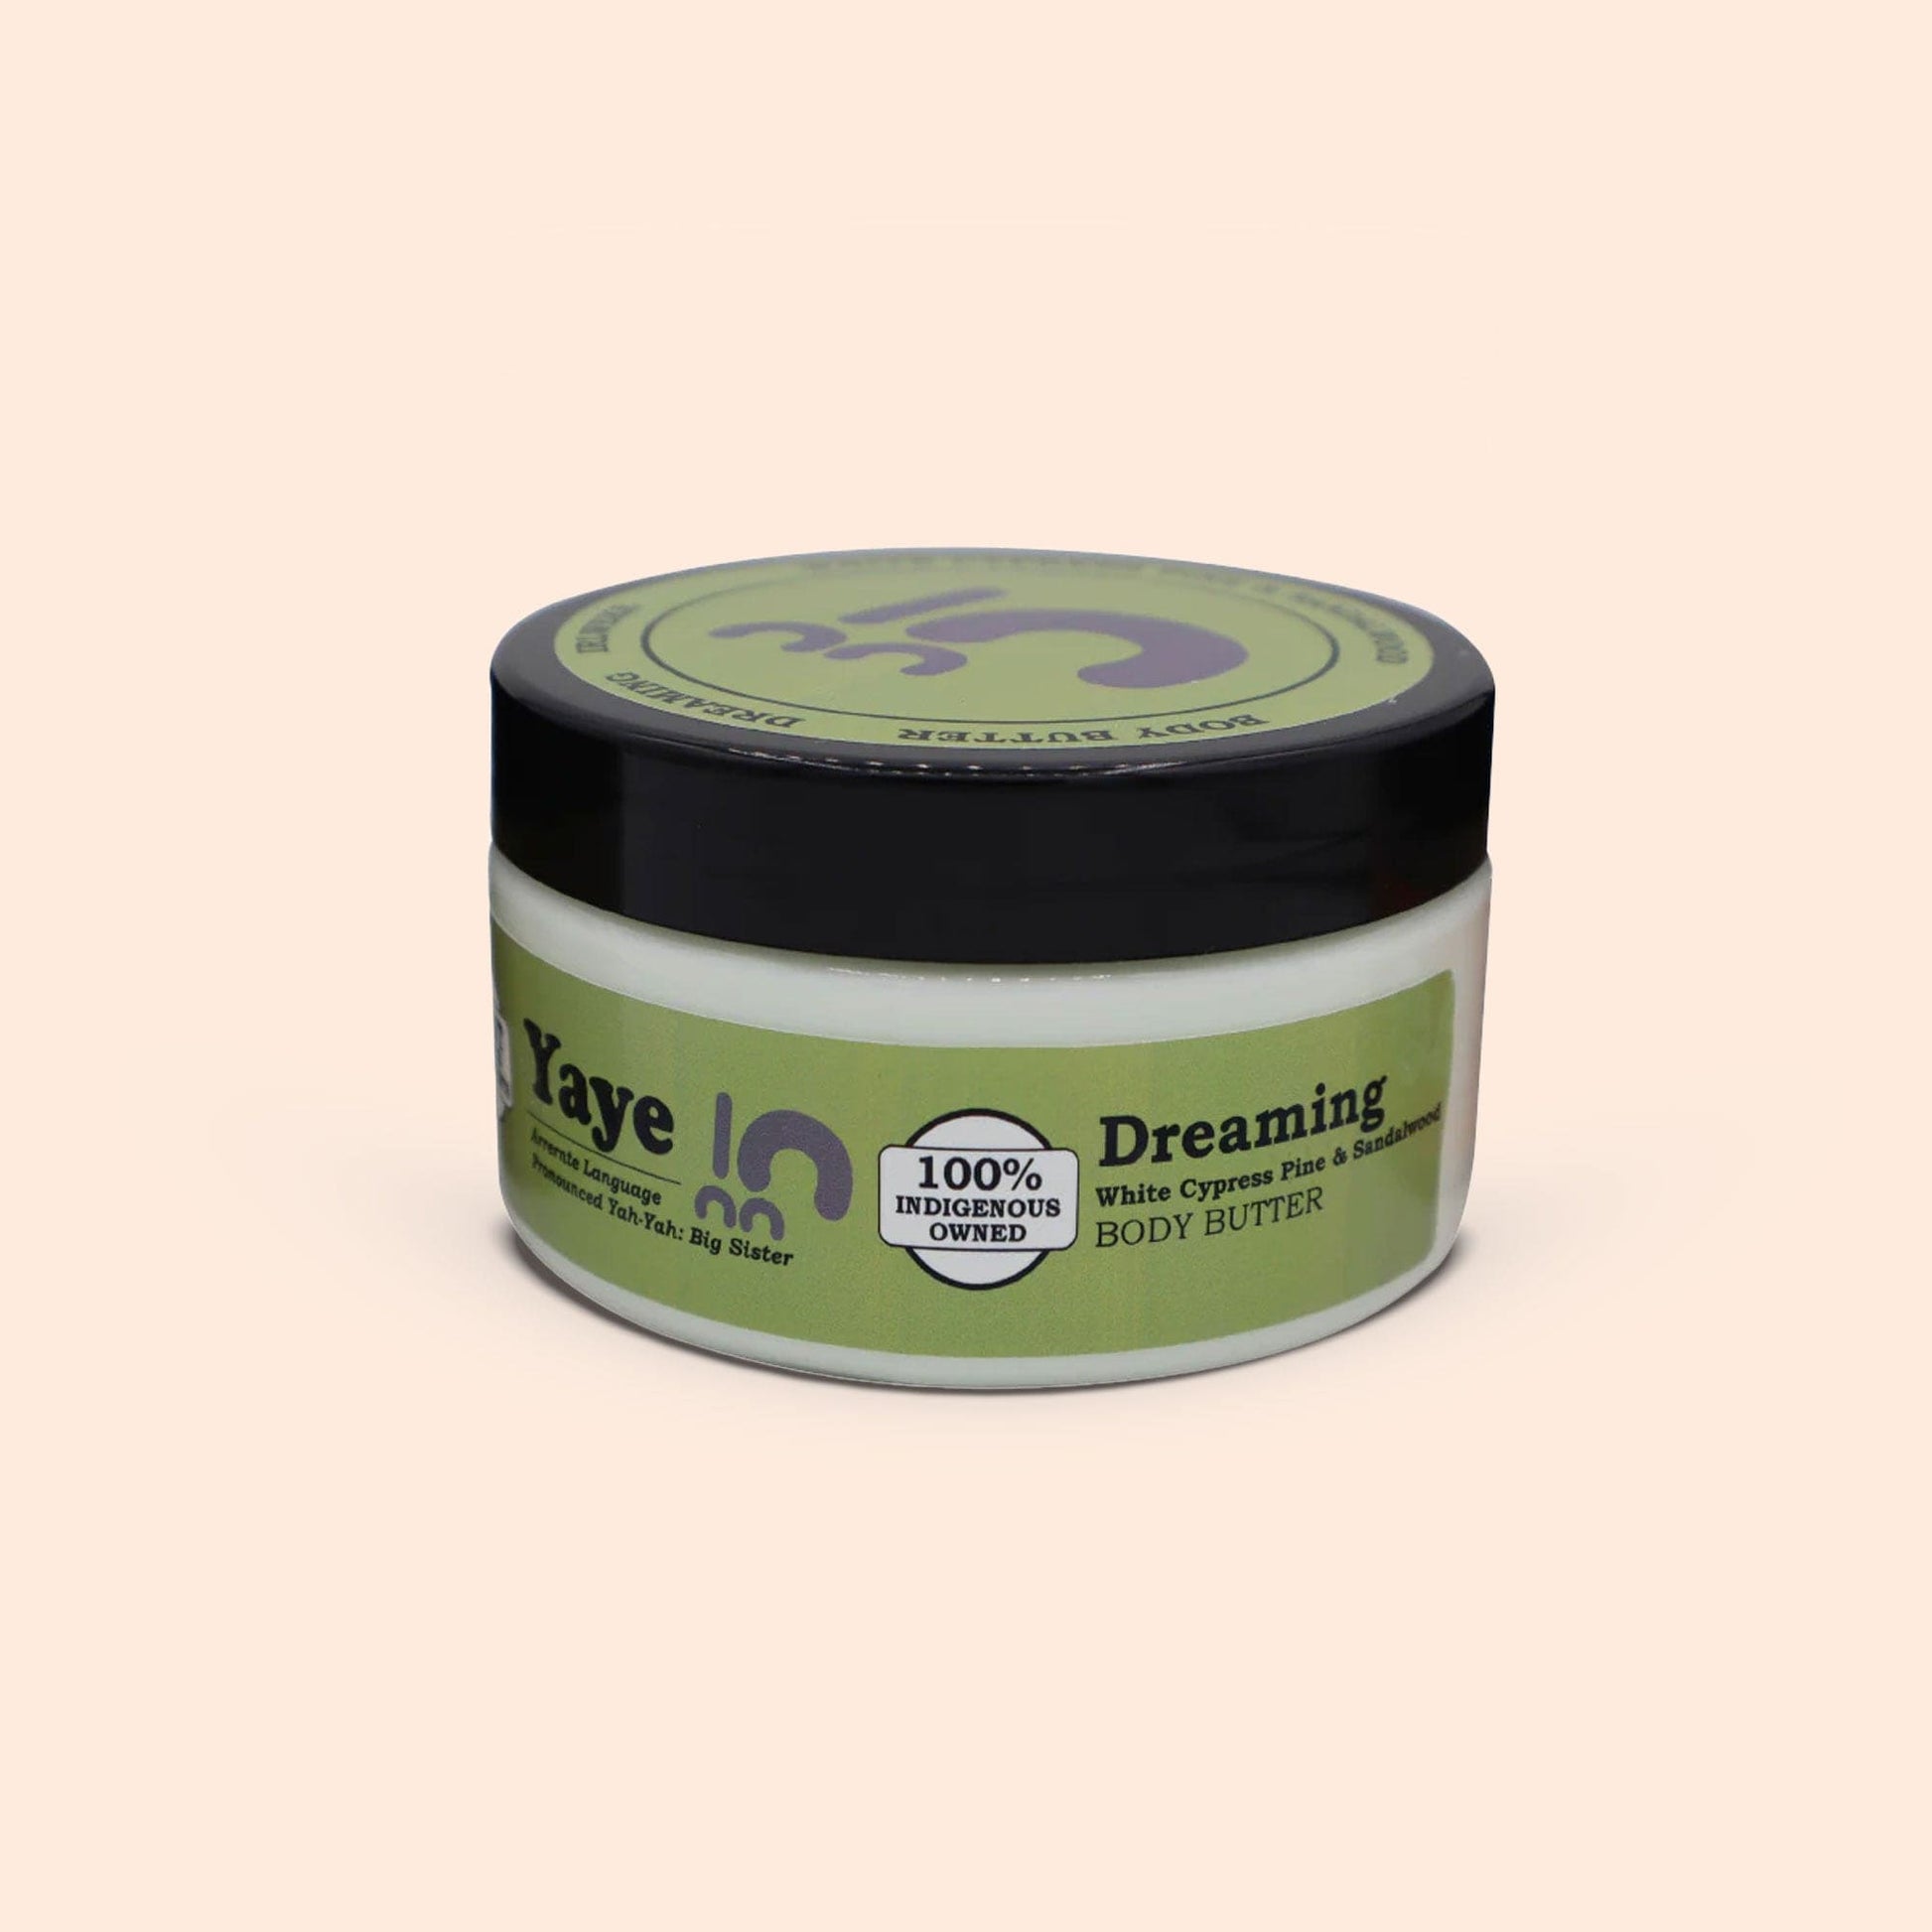 Aboriginal Body Butter Australian skin care product in jar with native plant extracts